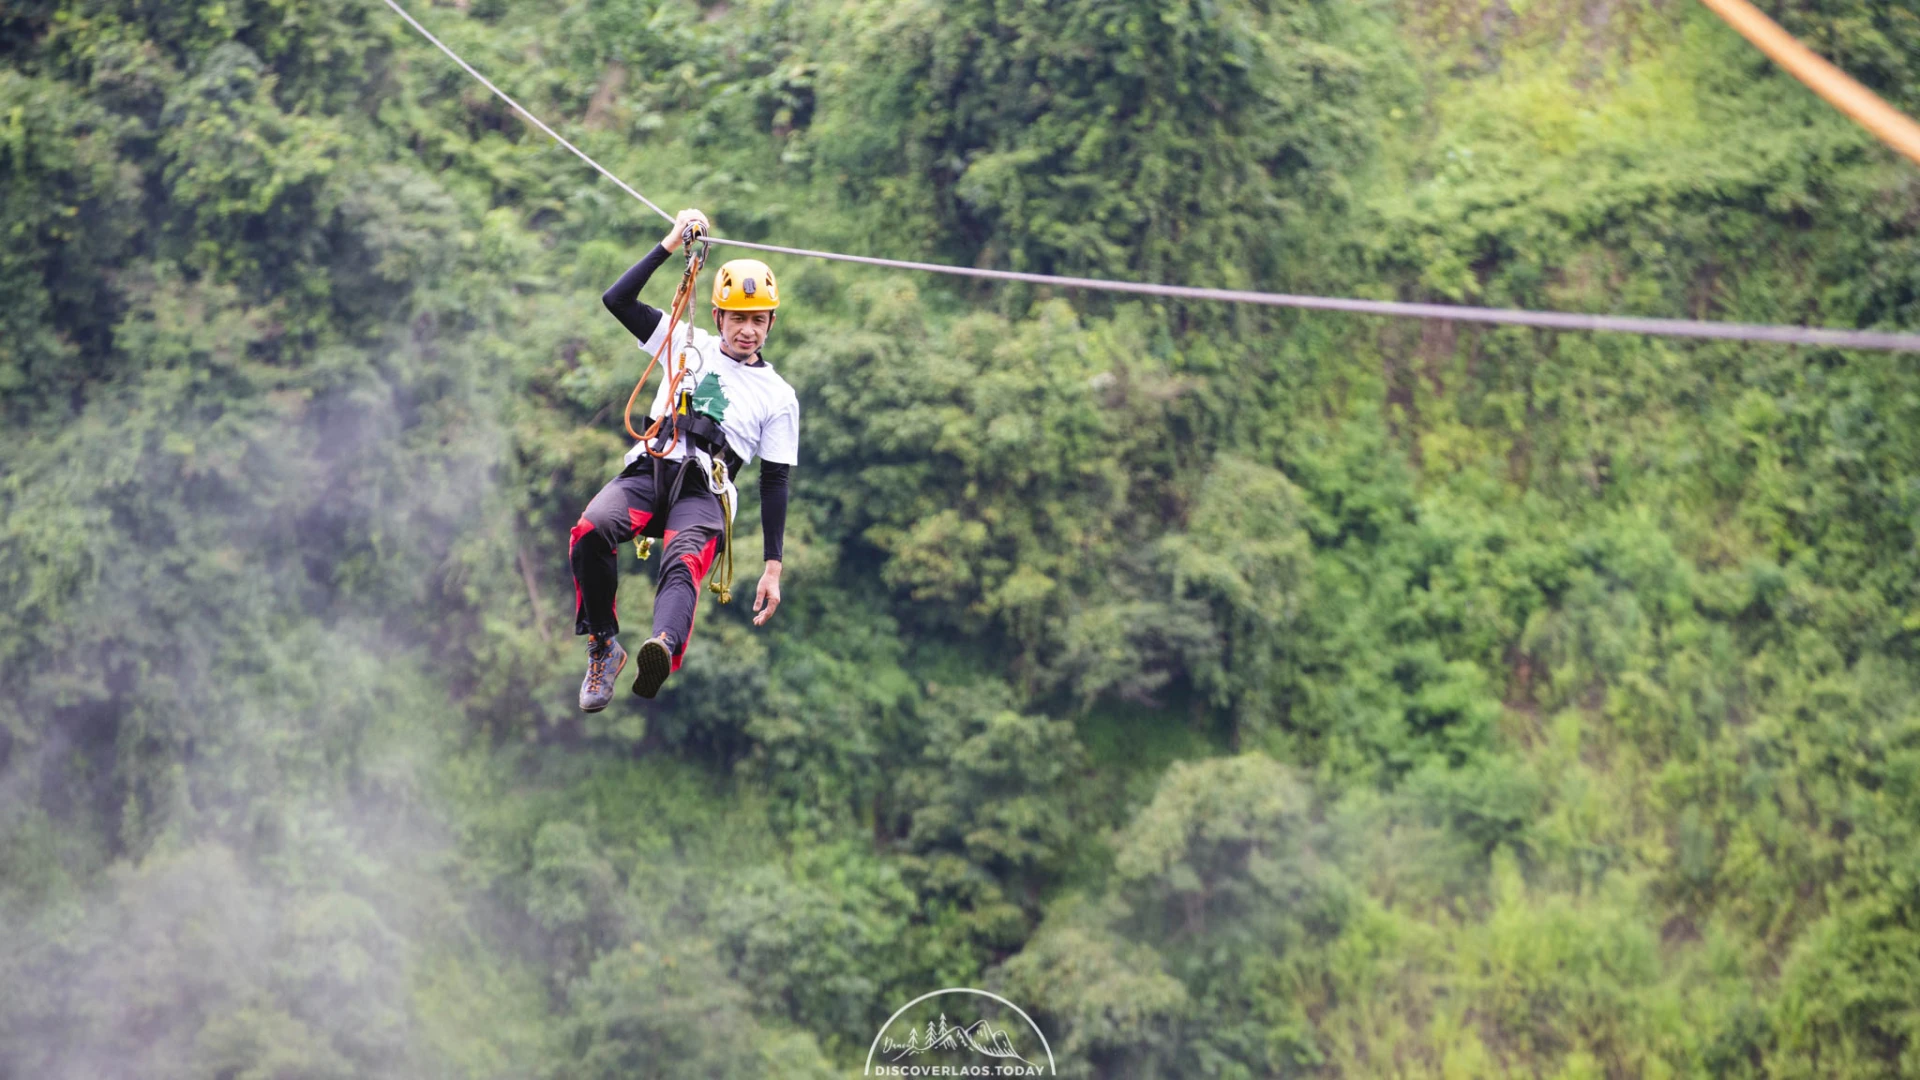 Zip-line experience at Fly @ Tad Fane